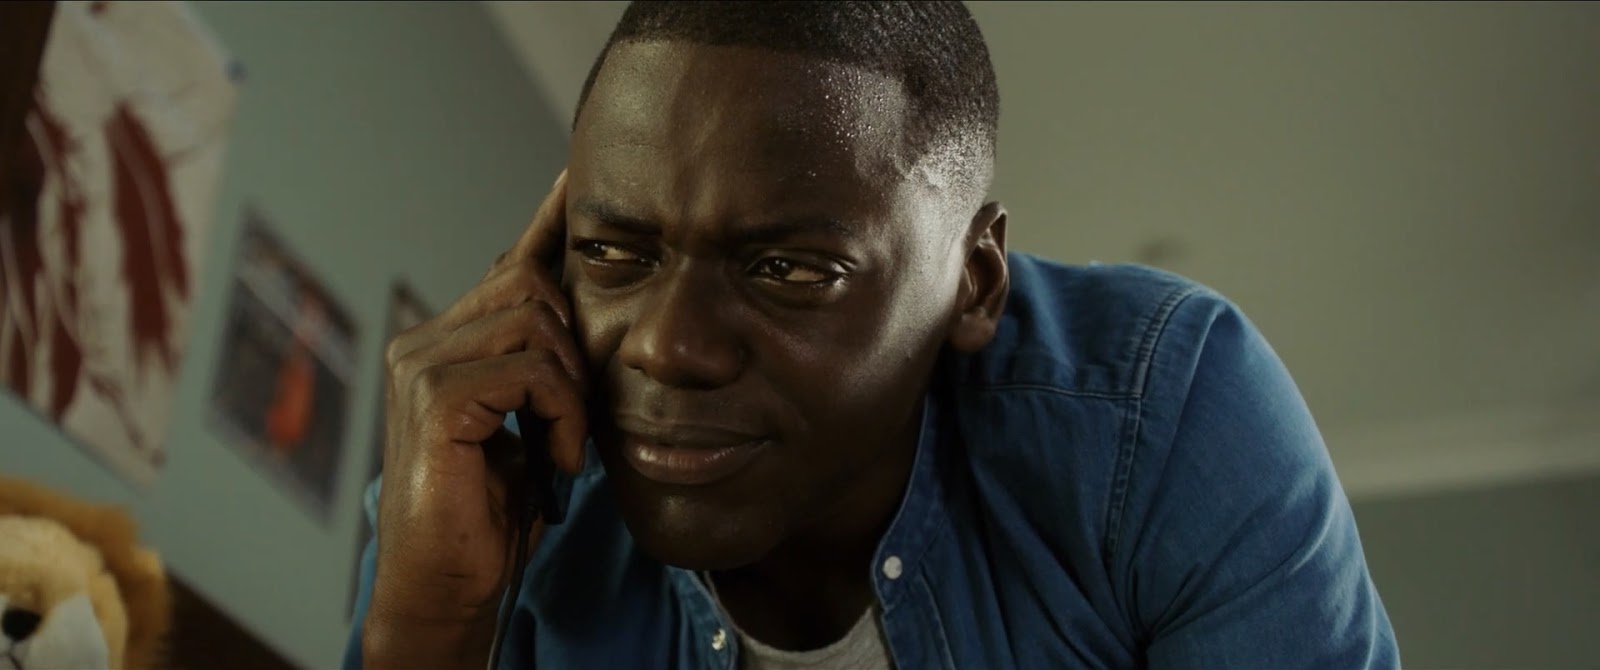 May get out. Дэниел Калуя прочь. Дэниел Калуя черное зеркало. Прочь (get out), 2017.